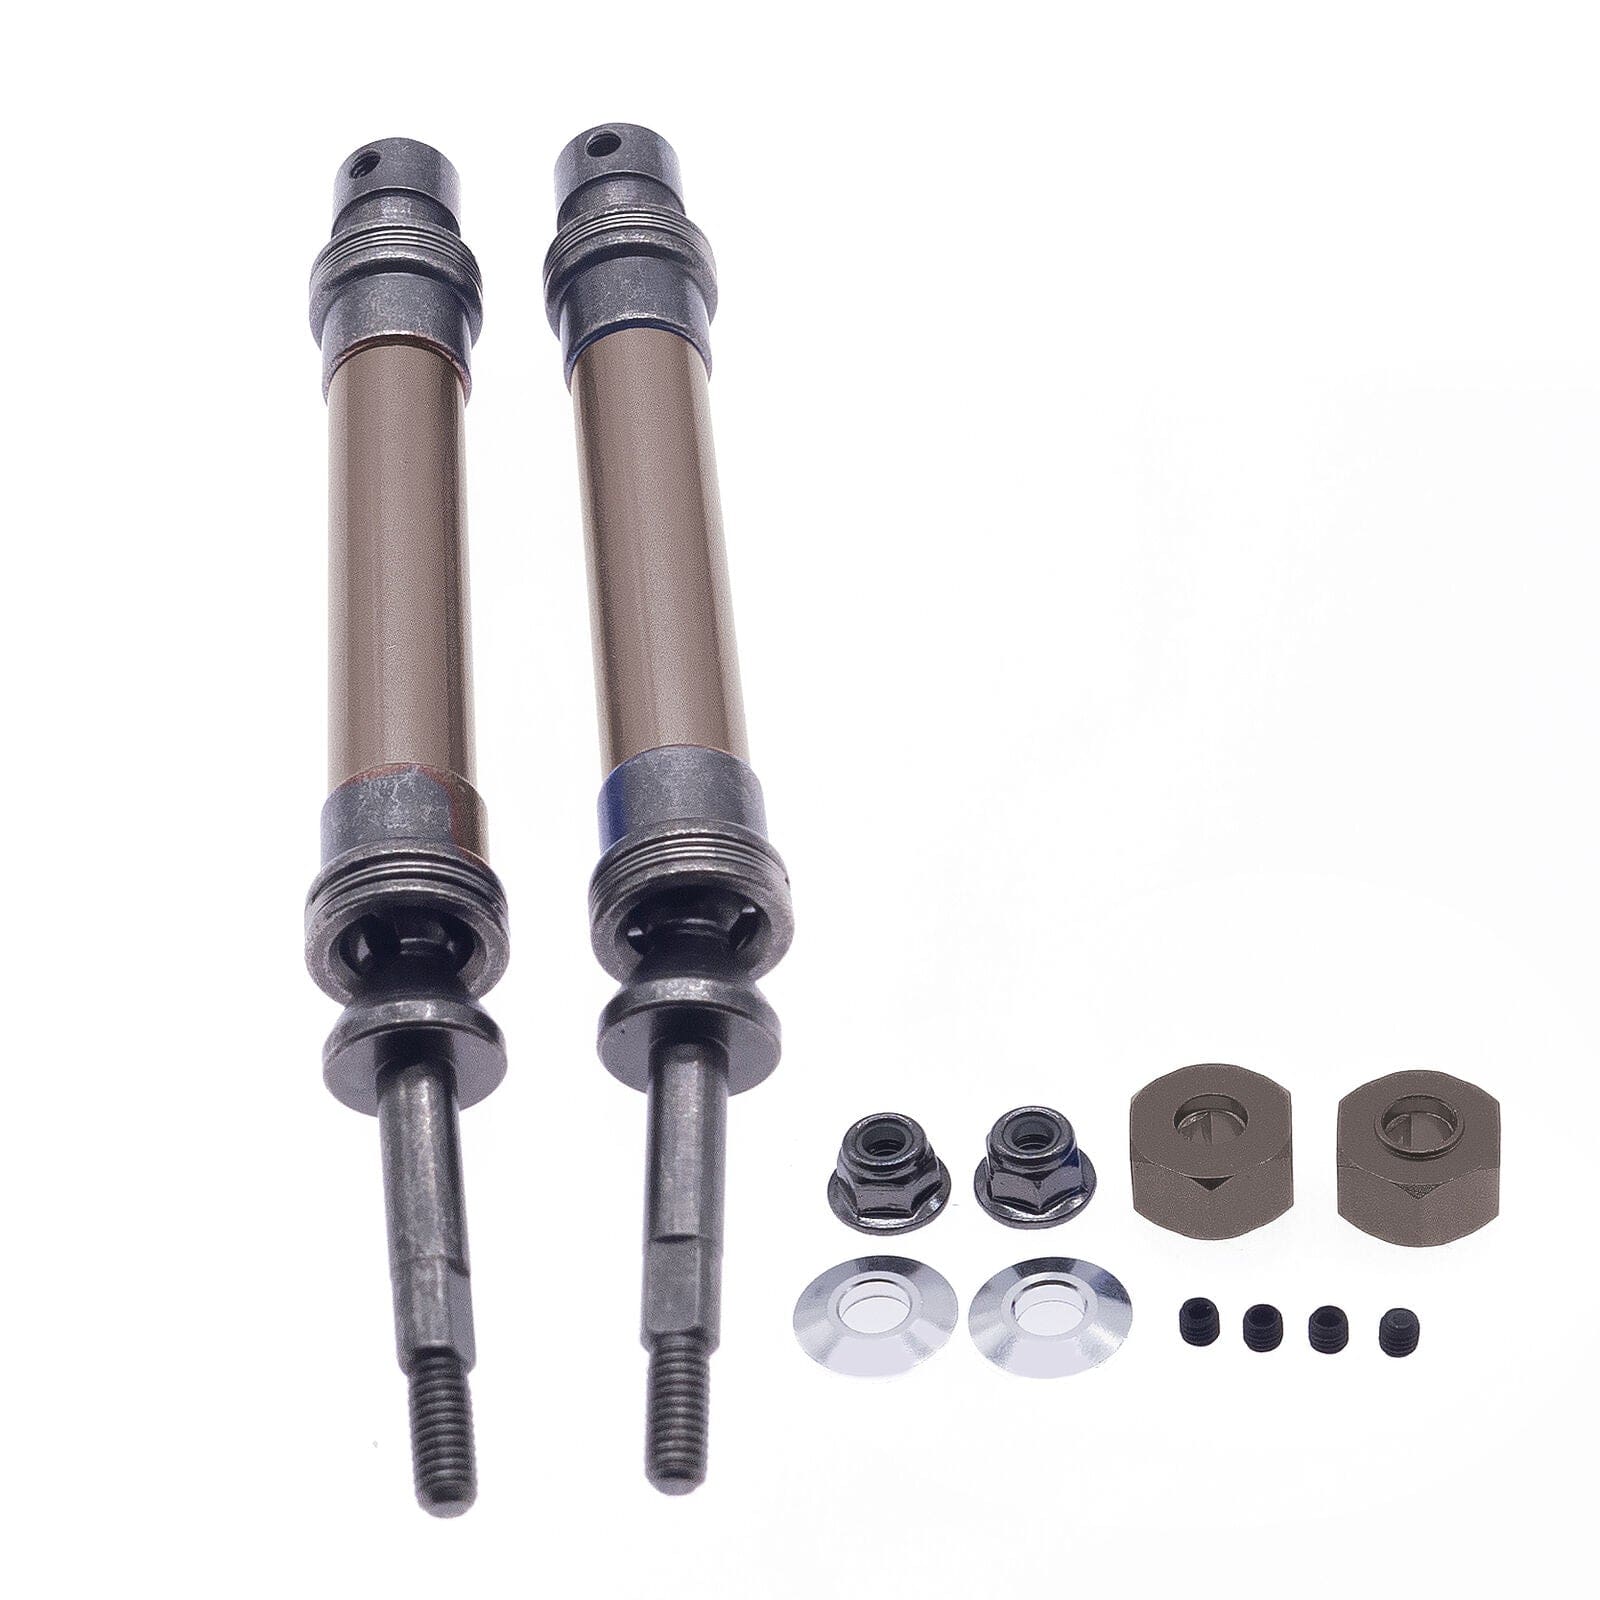 RCAWD ECX UPGRADE PARTS RCAWD CVD drive shaft rear for rc hobby car 1/10 ECX 2WD series AMP MT AMP DB Torment